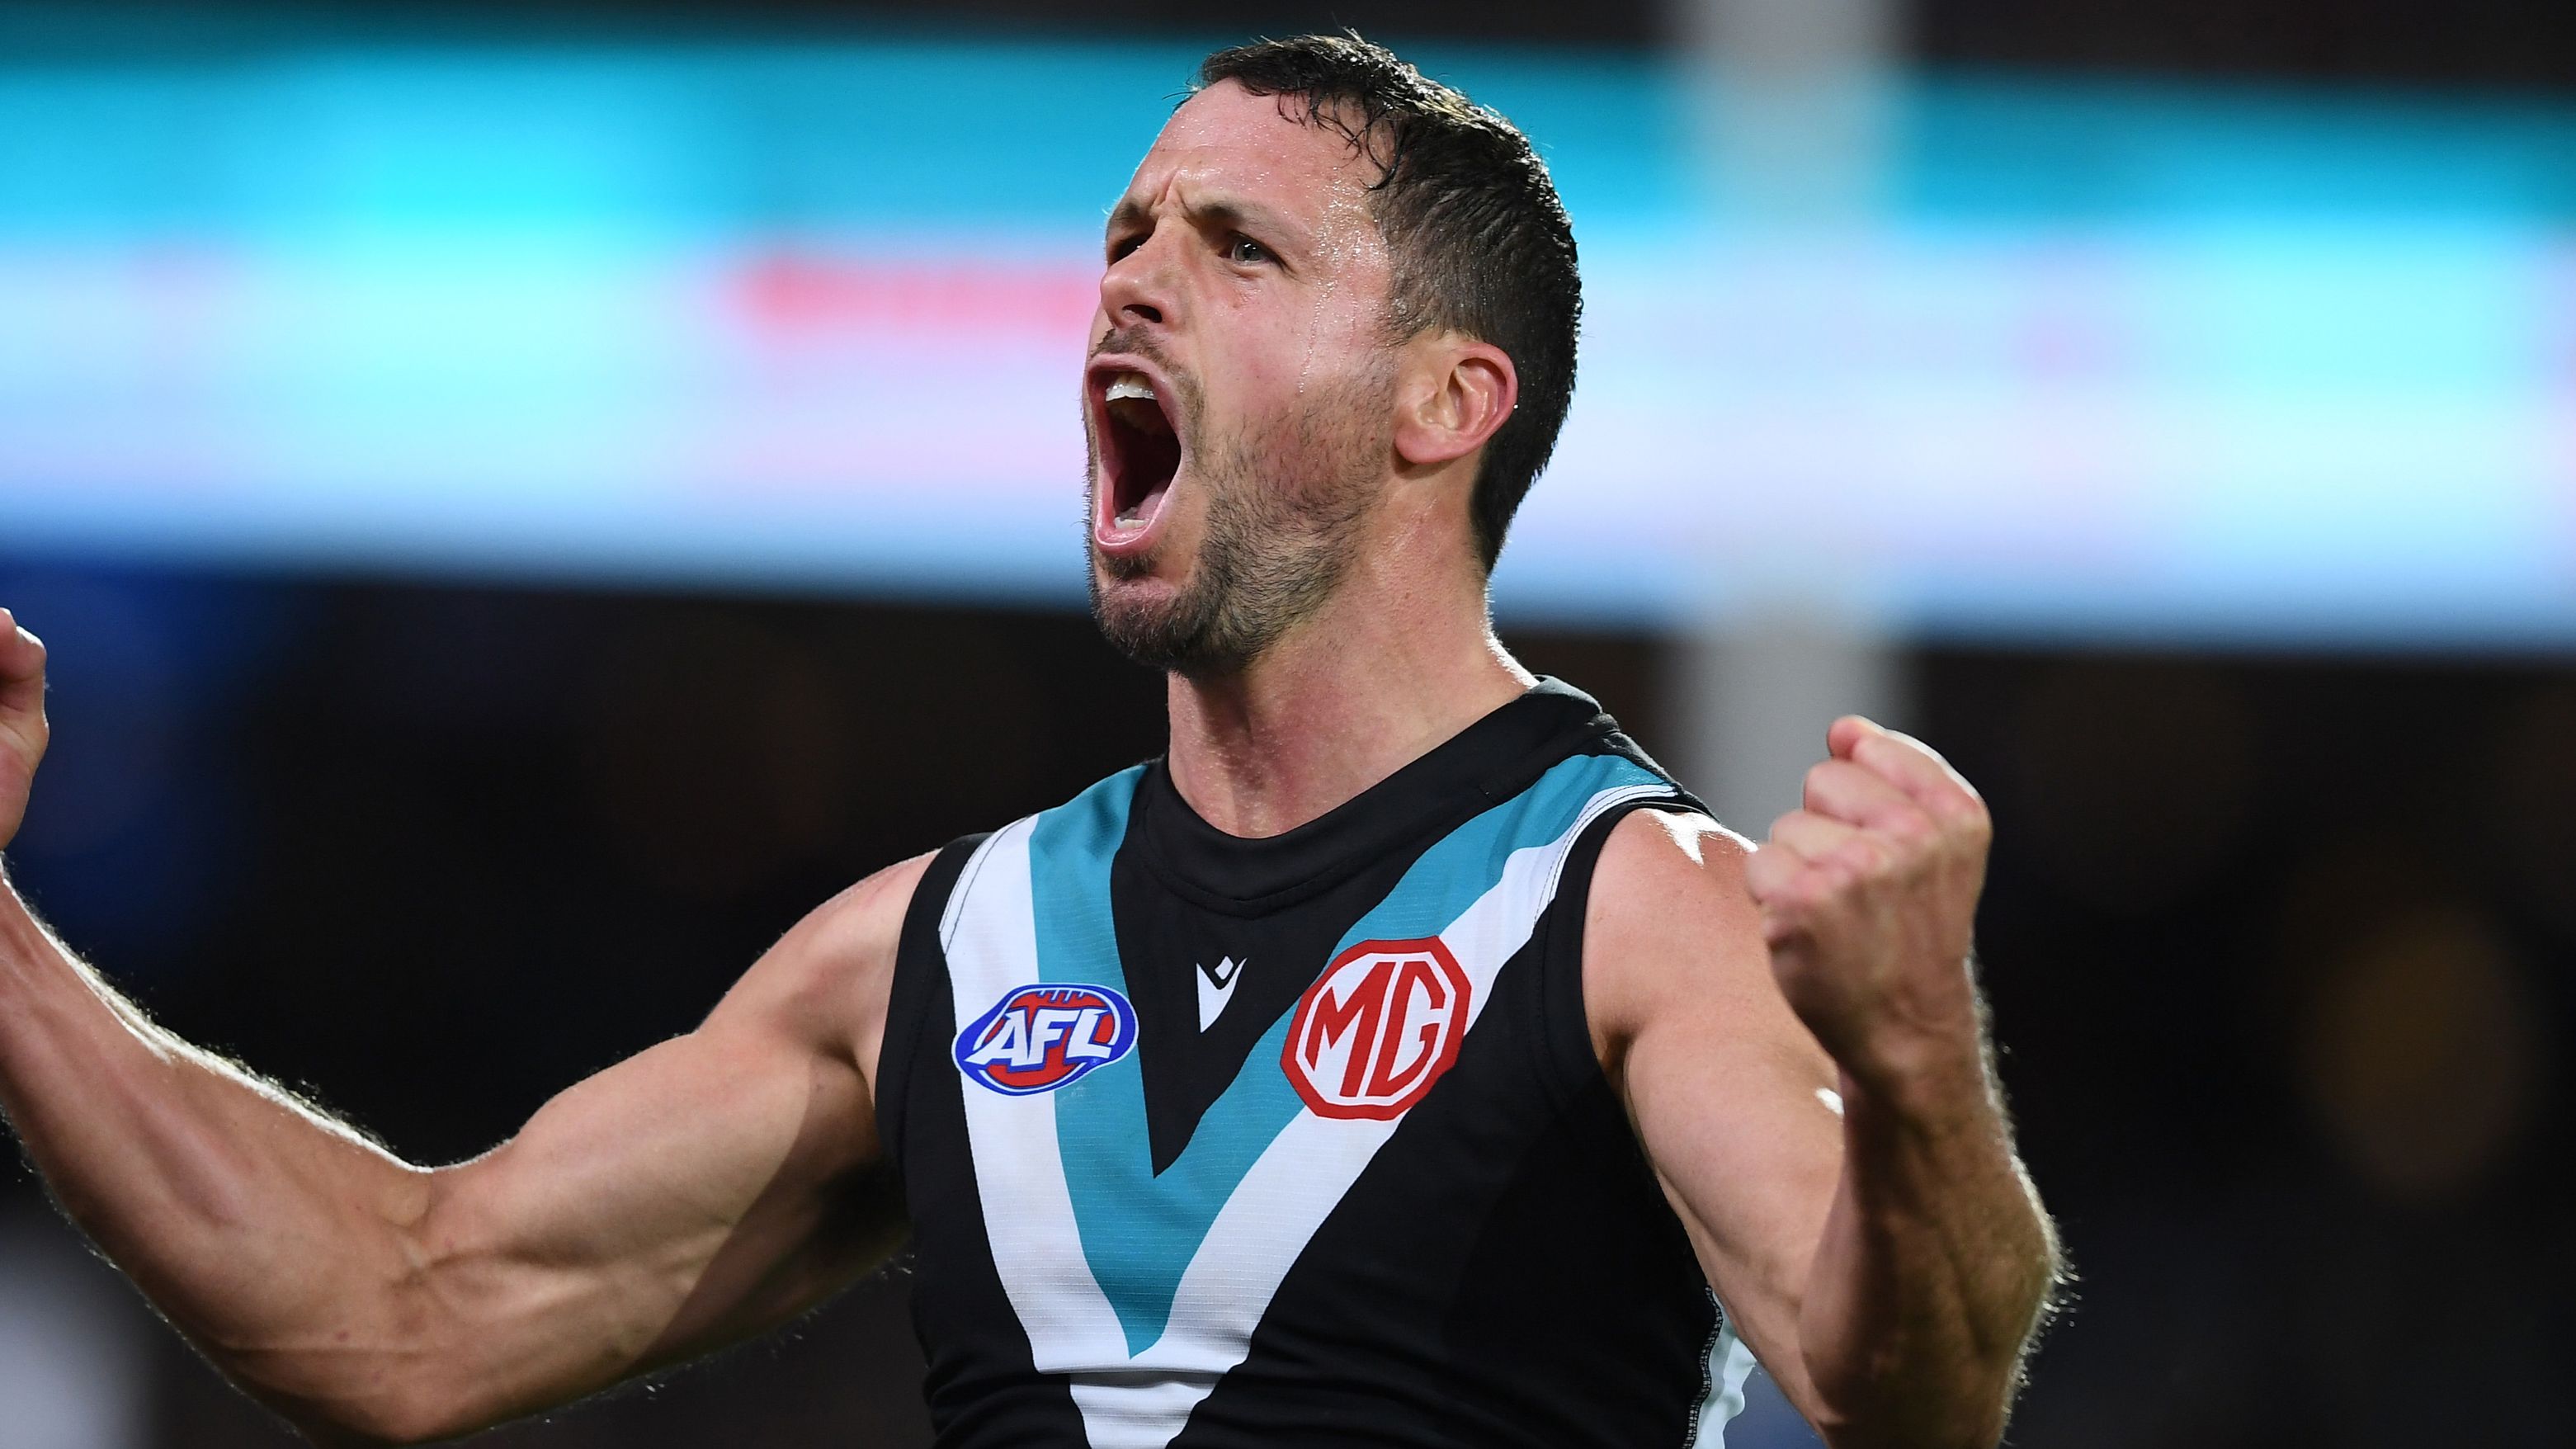 ADELAIDE, AUSTRALIA - MAY 06: Travis Boak of Port Adelaide   celebrates a goal during the round eight AFL match between the Port Adelaide Power and the Western Bulldogs at Adelaide Oval on May 06, 2022 in Adelaide, Australia. (Photo by Mark Brake/Getty Images)